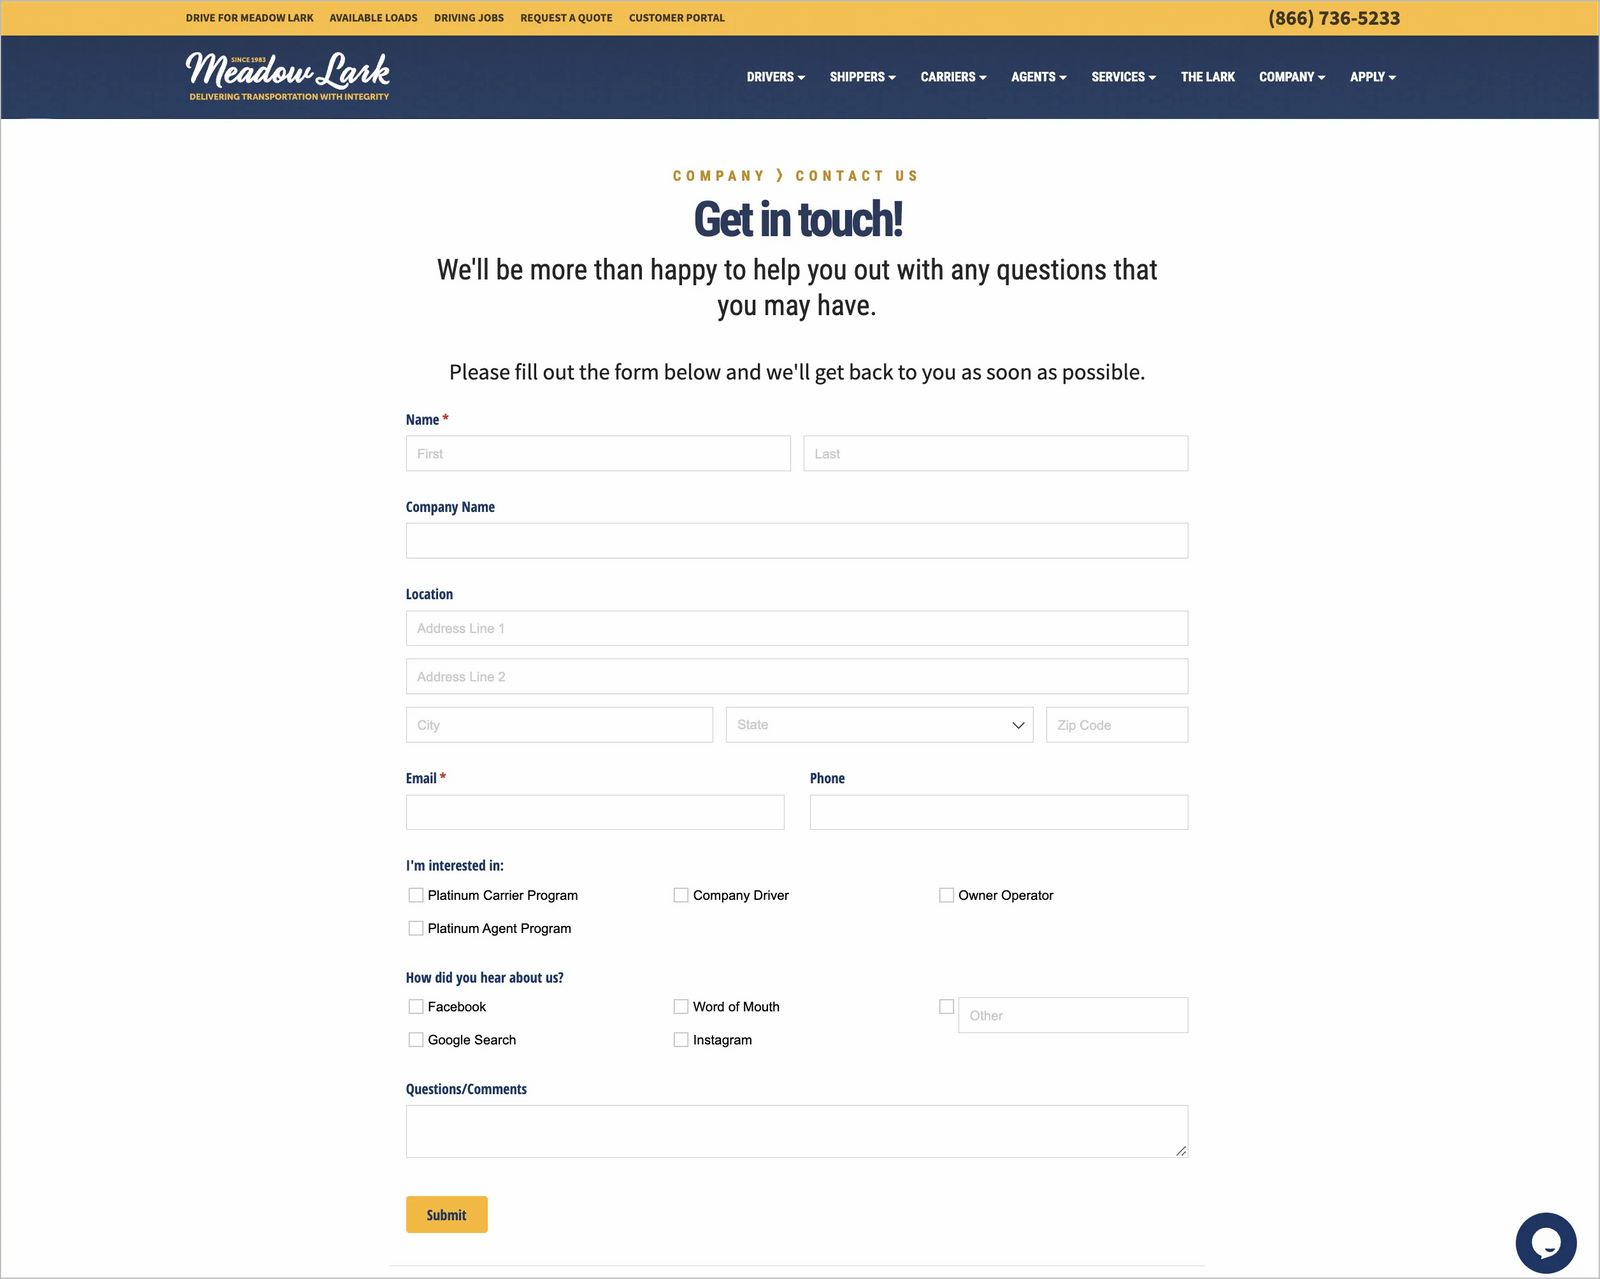 An example of a contact page on the Meadlow Lark Company website.